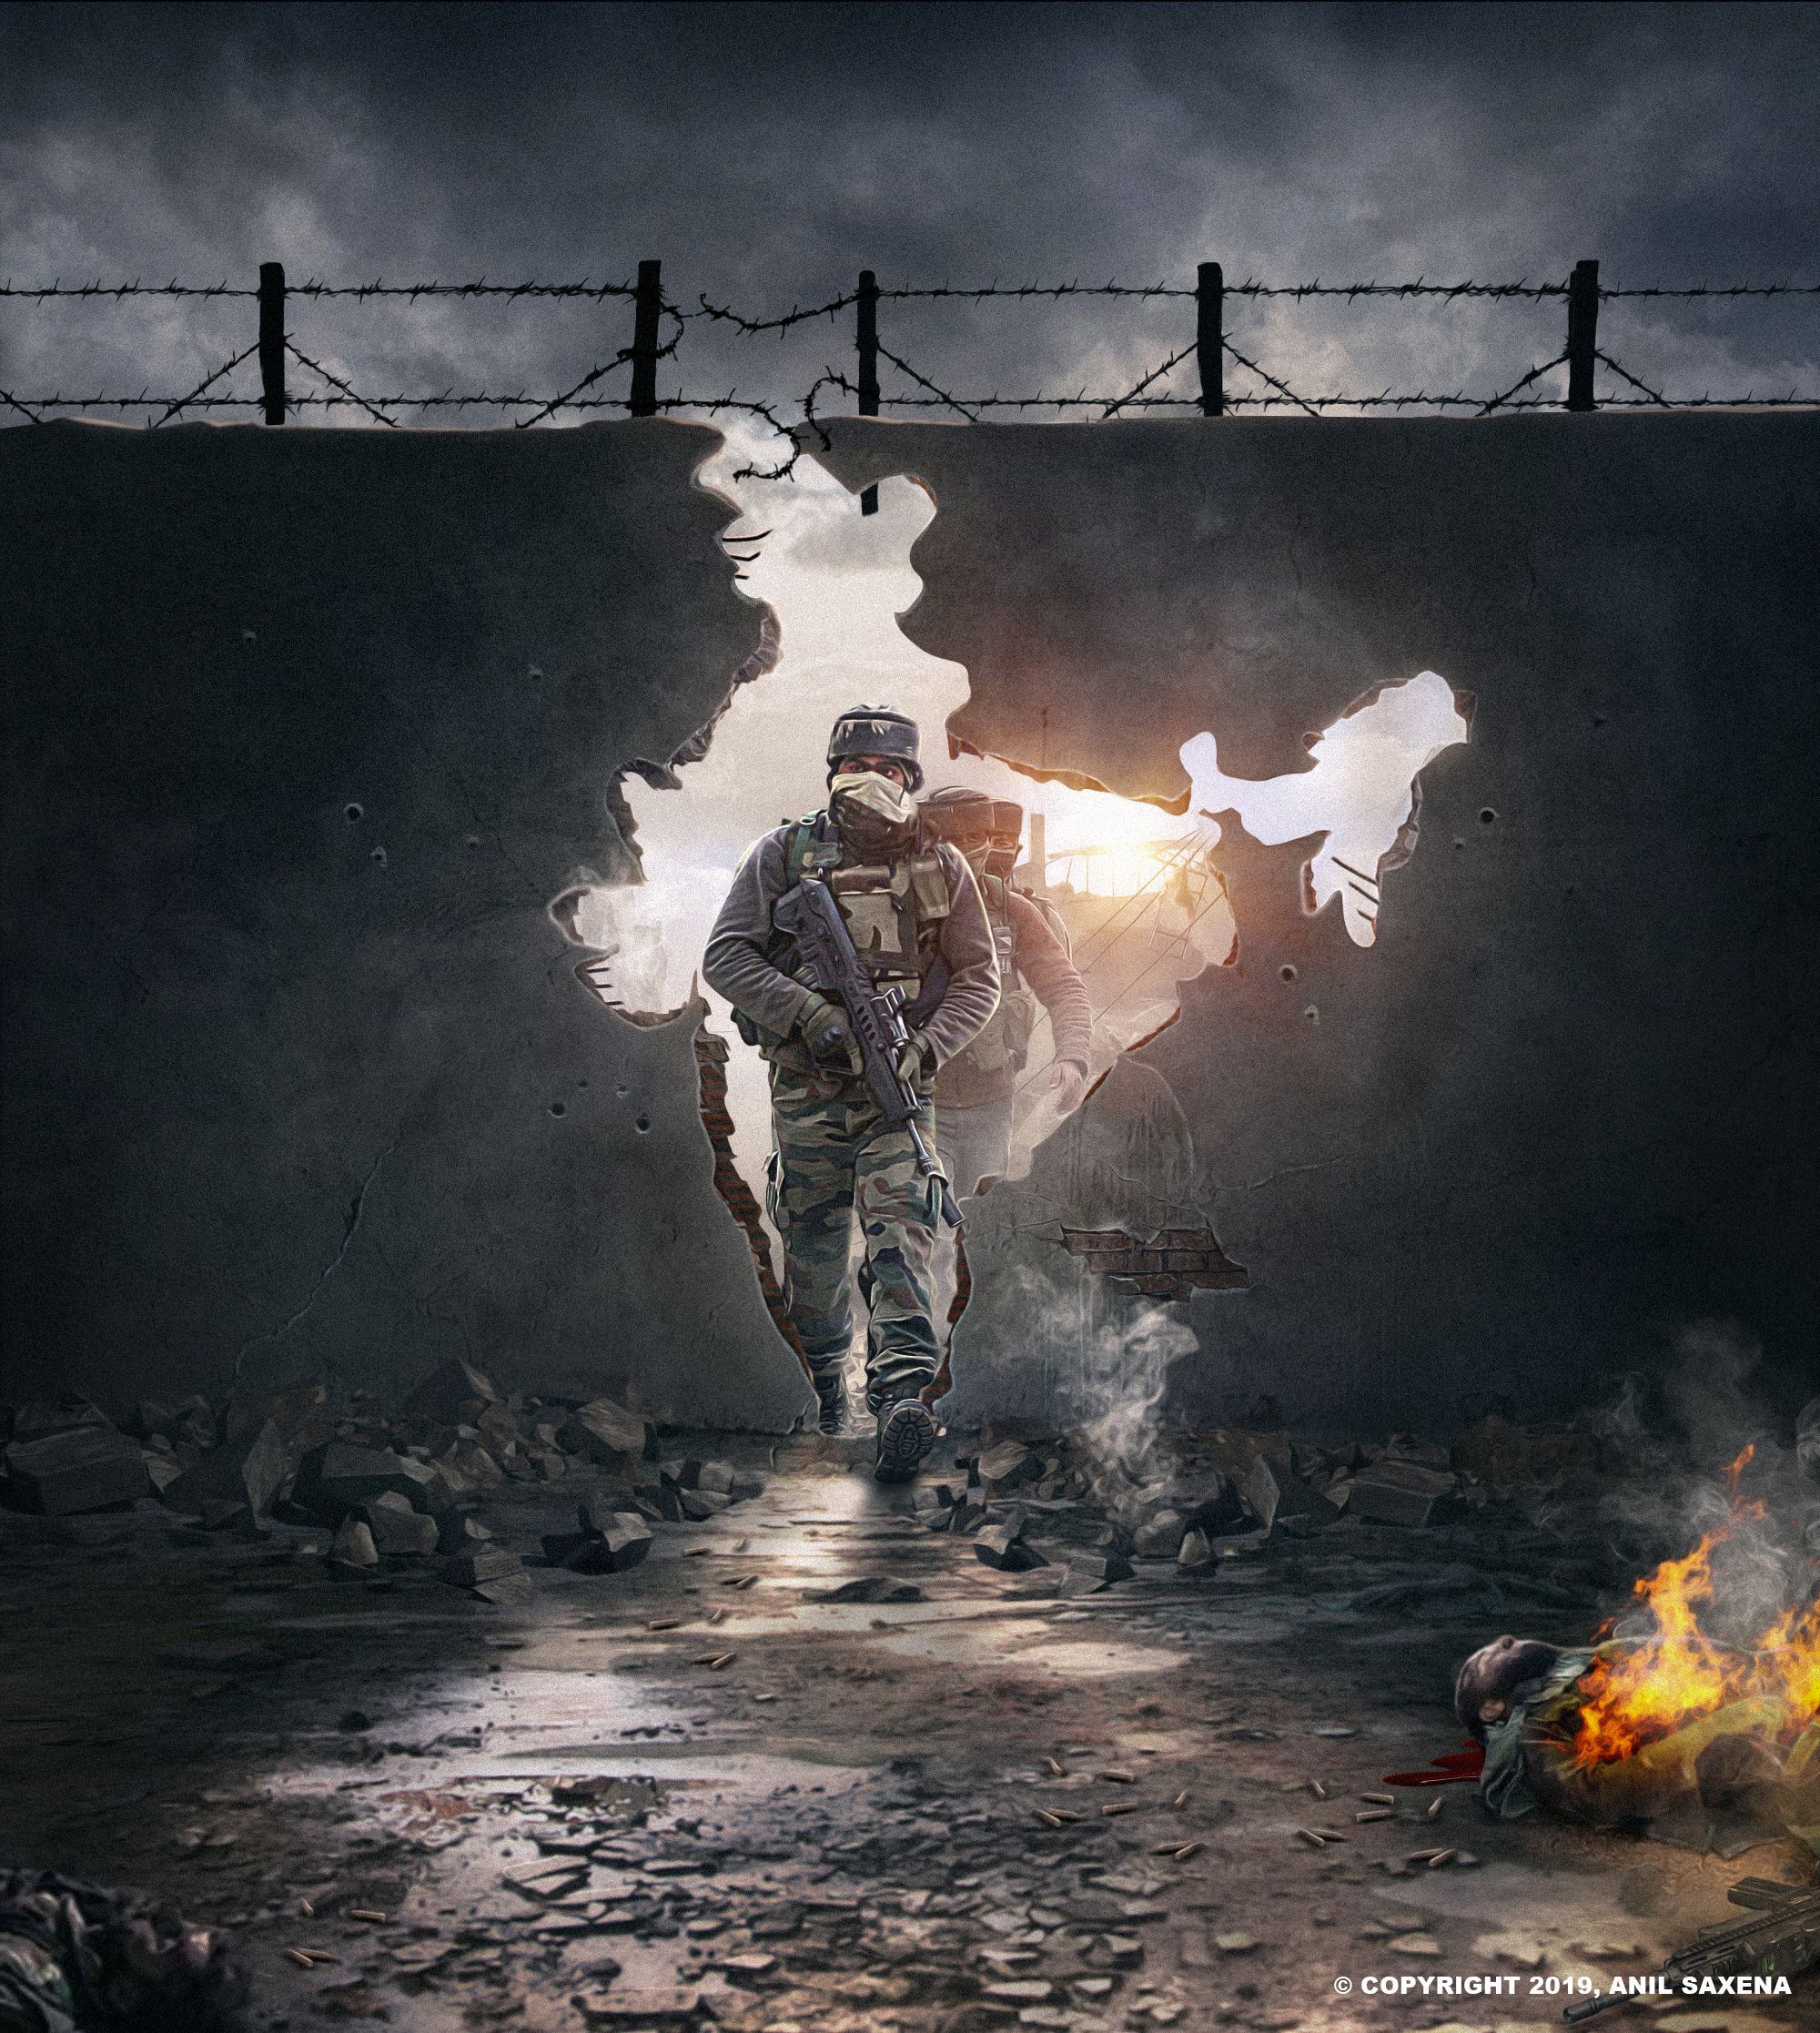 Behance - 为您呈现. Indian army wallpaper, Army image, Indian army special forces